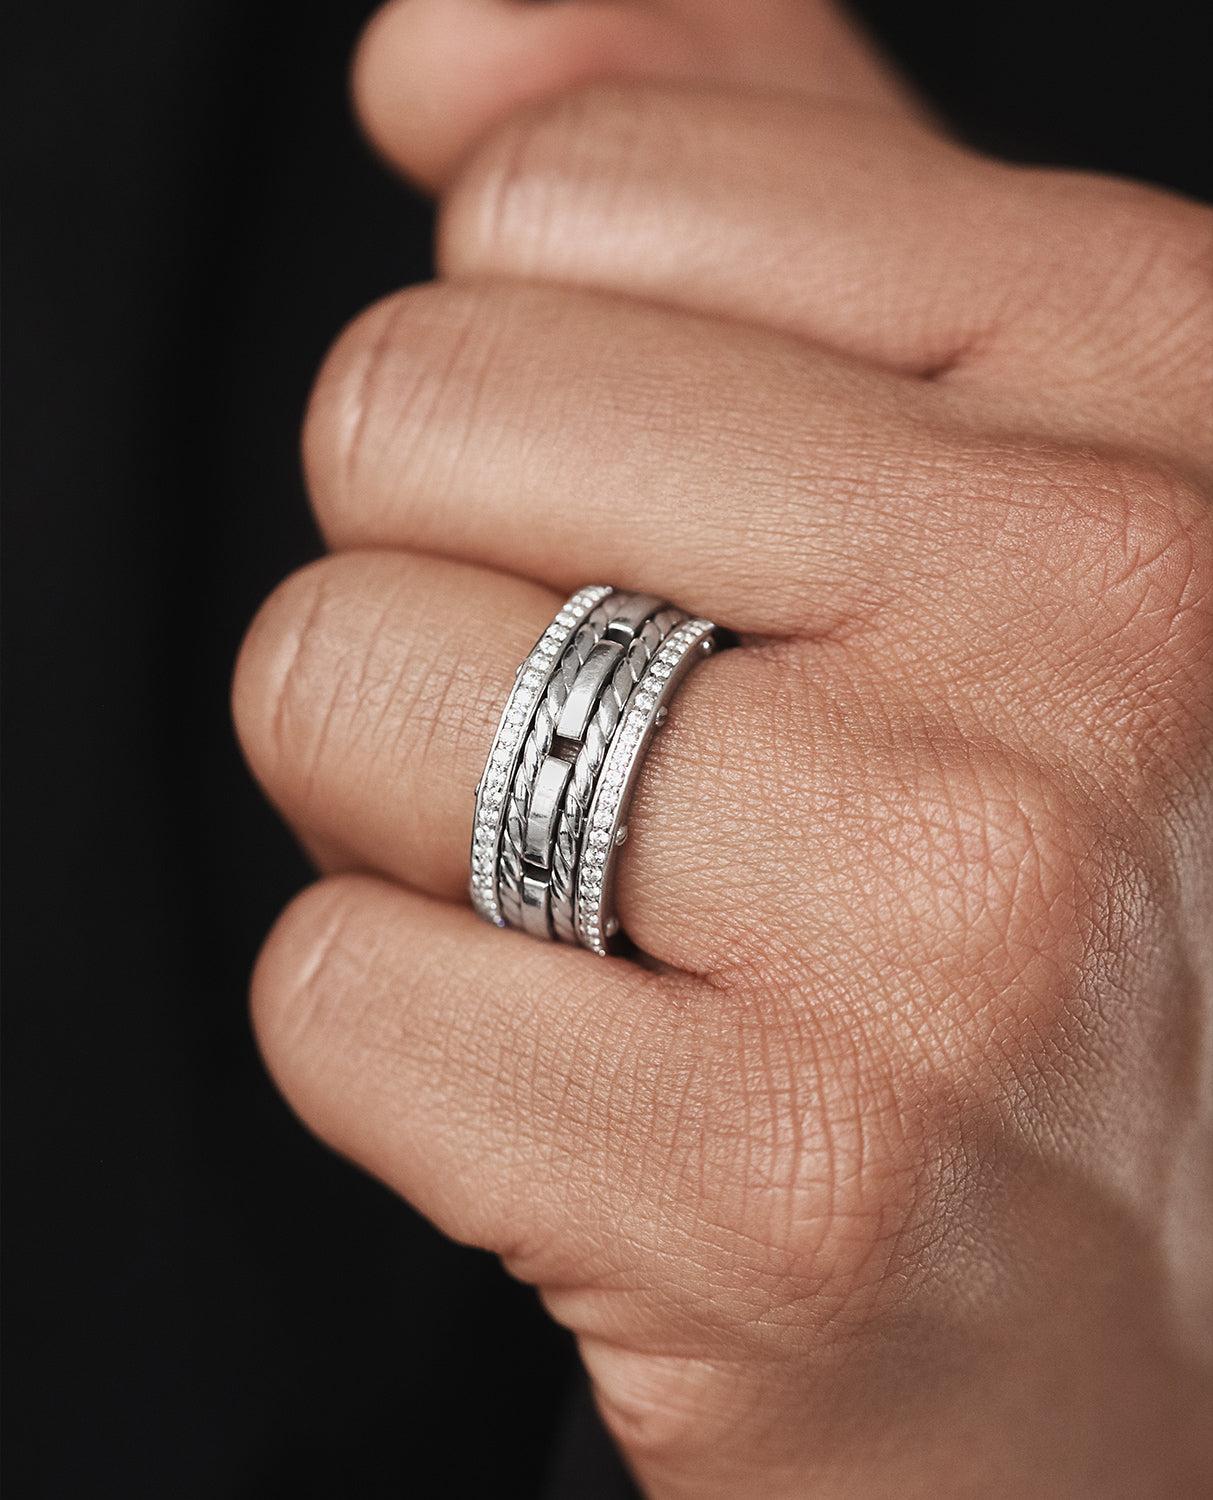 Three bold-looking rings, pave set with 1.05ct brilliant cut round white diamonds, connected by the signature exclusive Rockford screws with rope designs flowing in between the bands. Our ROPES ring has a very modern, striking look with a special